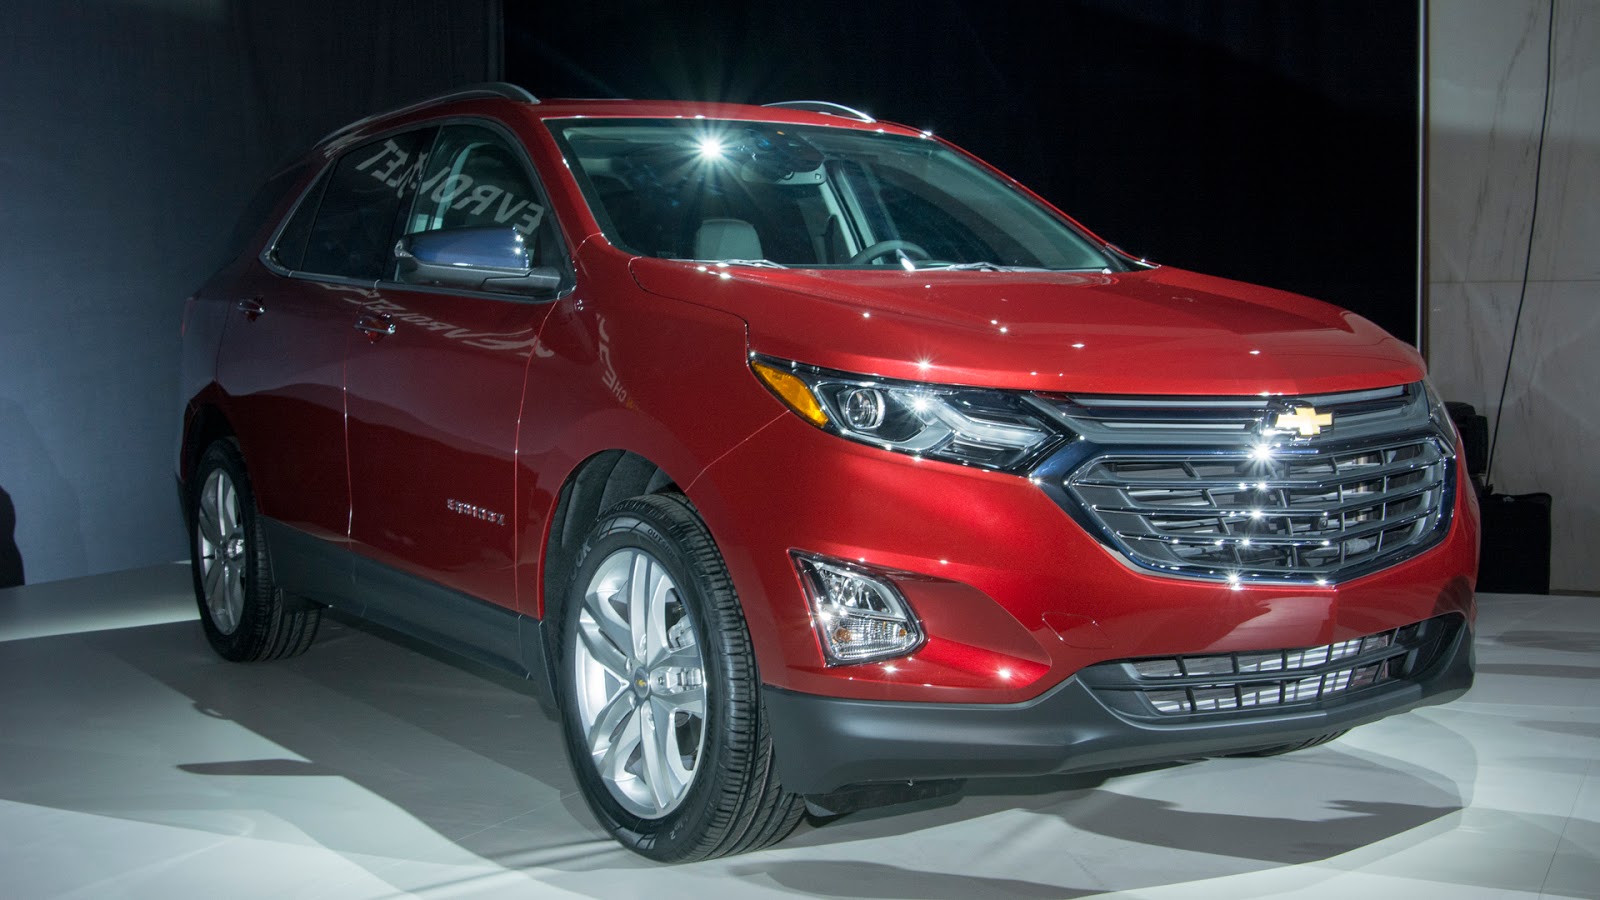 2018 Chevy Equinox gains turbo power and an optional diesel - New Car